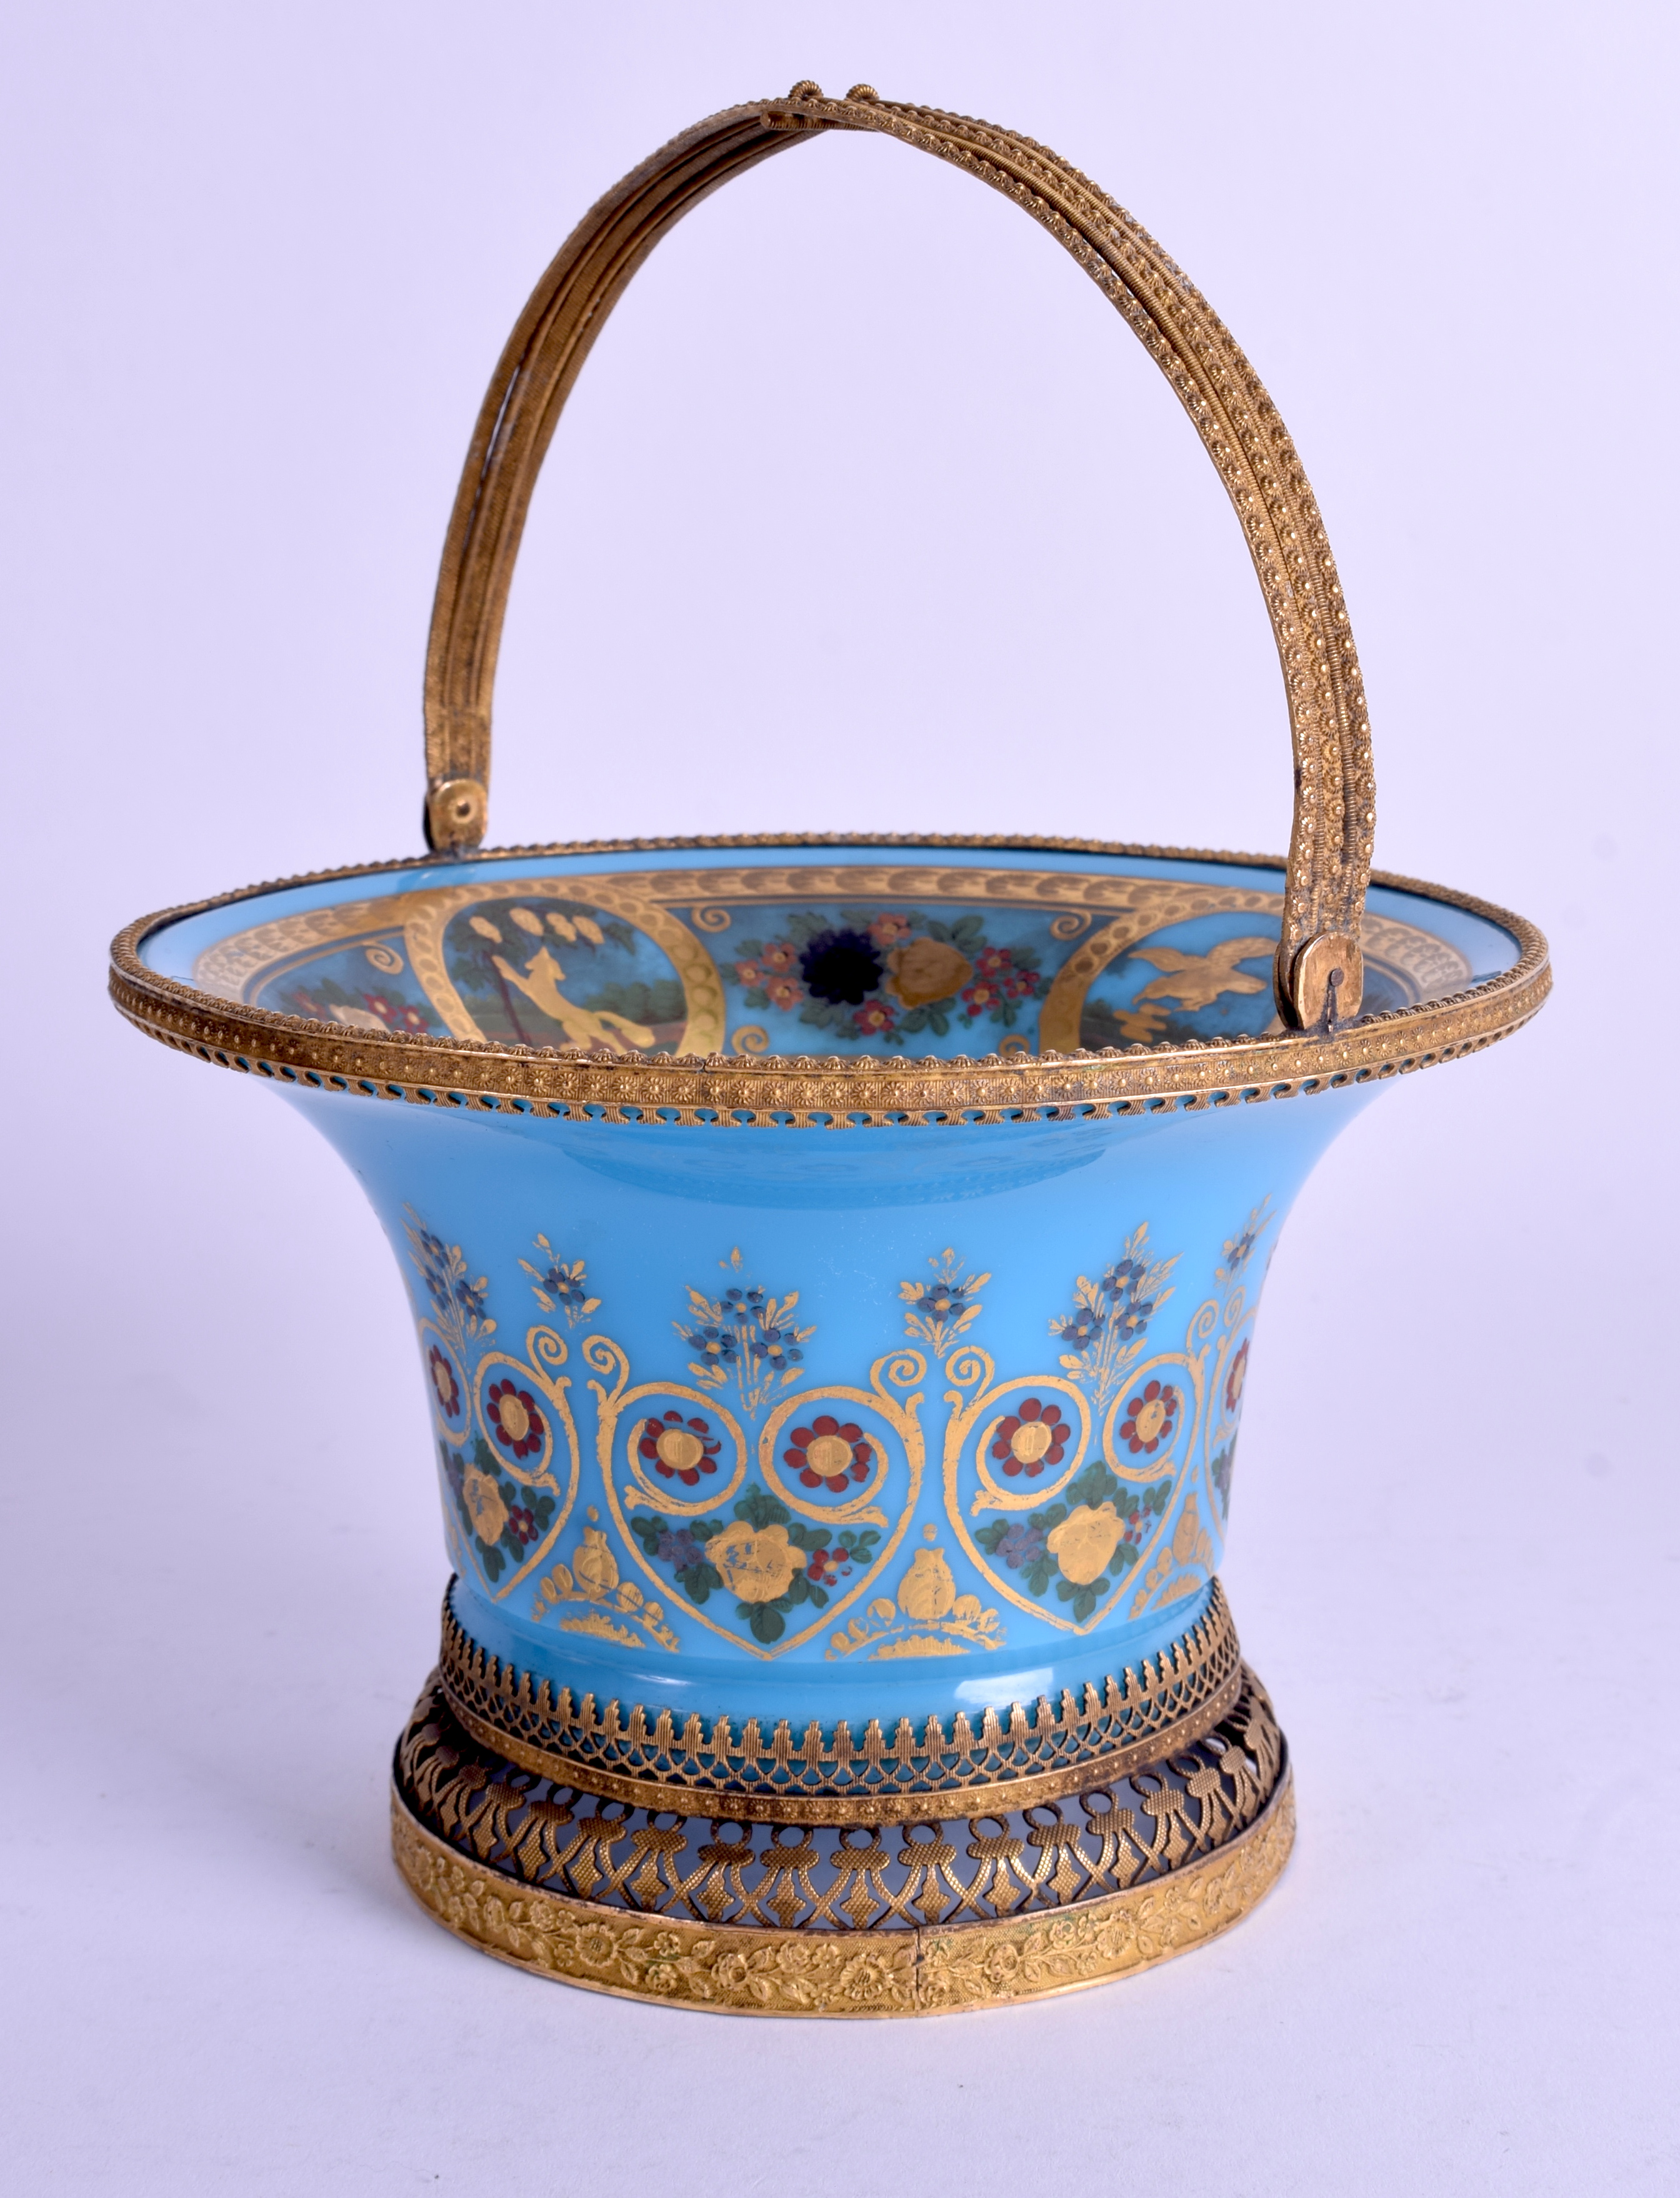 A LOVELY 19TH CENTURY AESTHETIC MOVEMENT OPALINE BLUE GLASS BASKET enamelled with birds within land